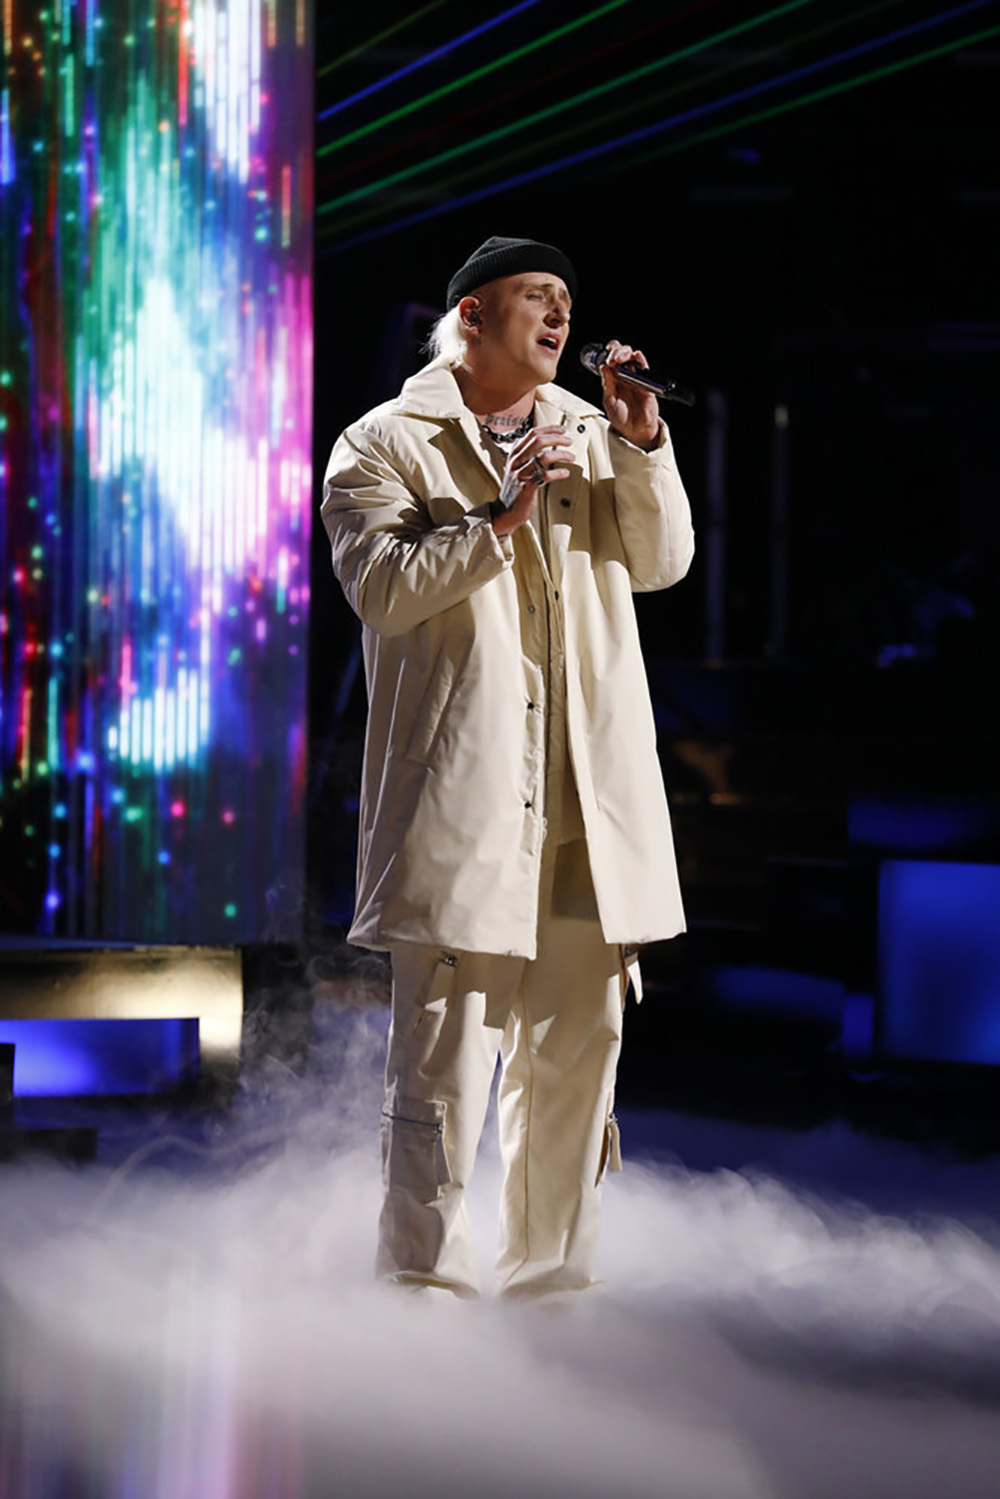 The Voice -- “Live Top 10 Performances” Episode 2218A -- Pictured: Bodie -- (Photo by: Trae Patton/NBC)